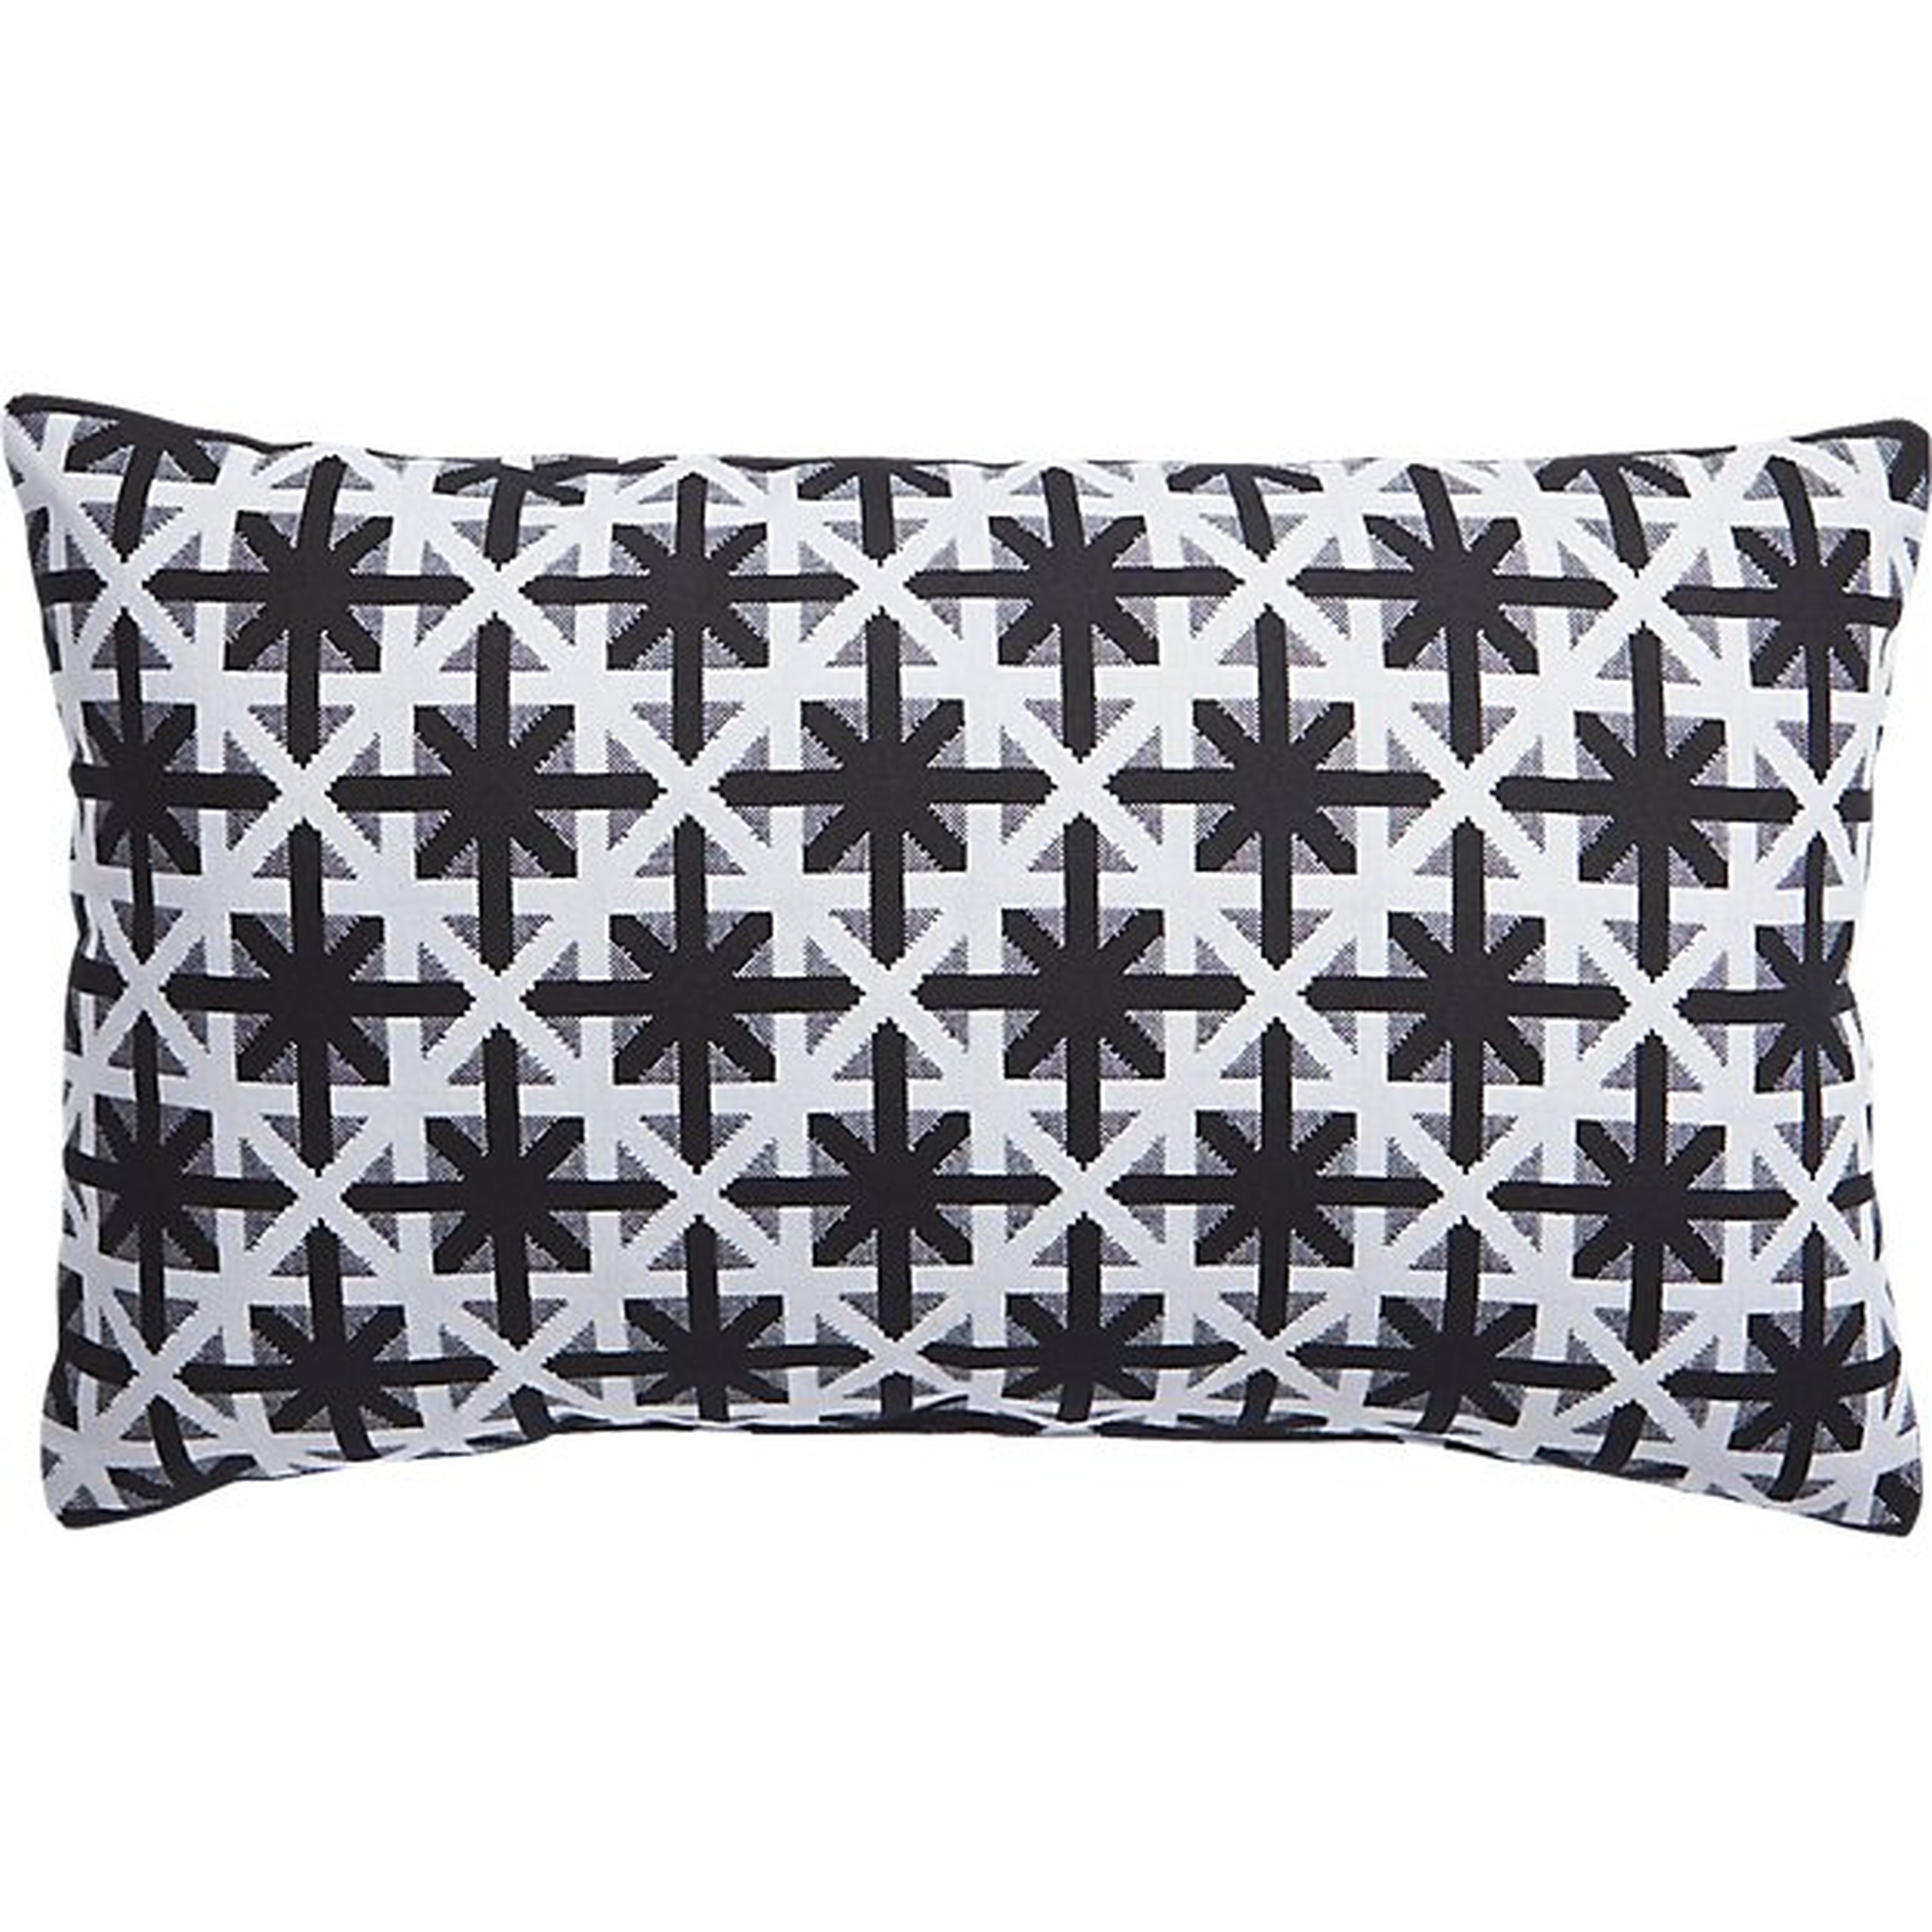 20"x12" cafe white and black outdoor pillow - CB2